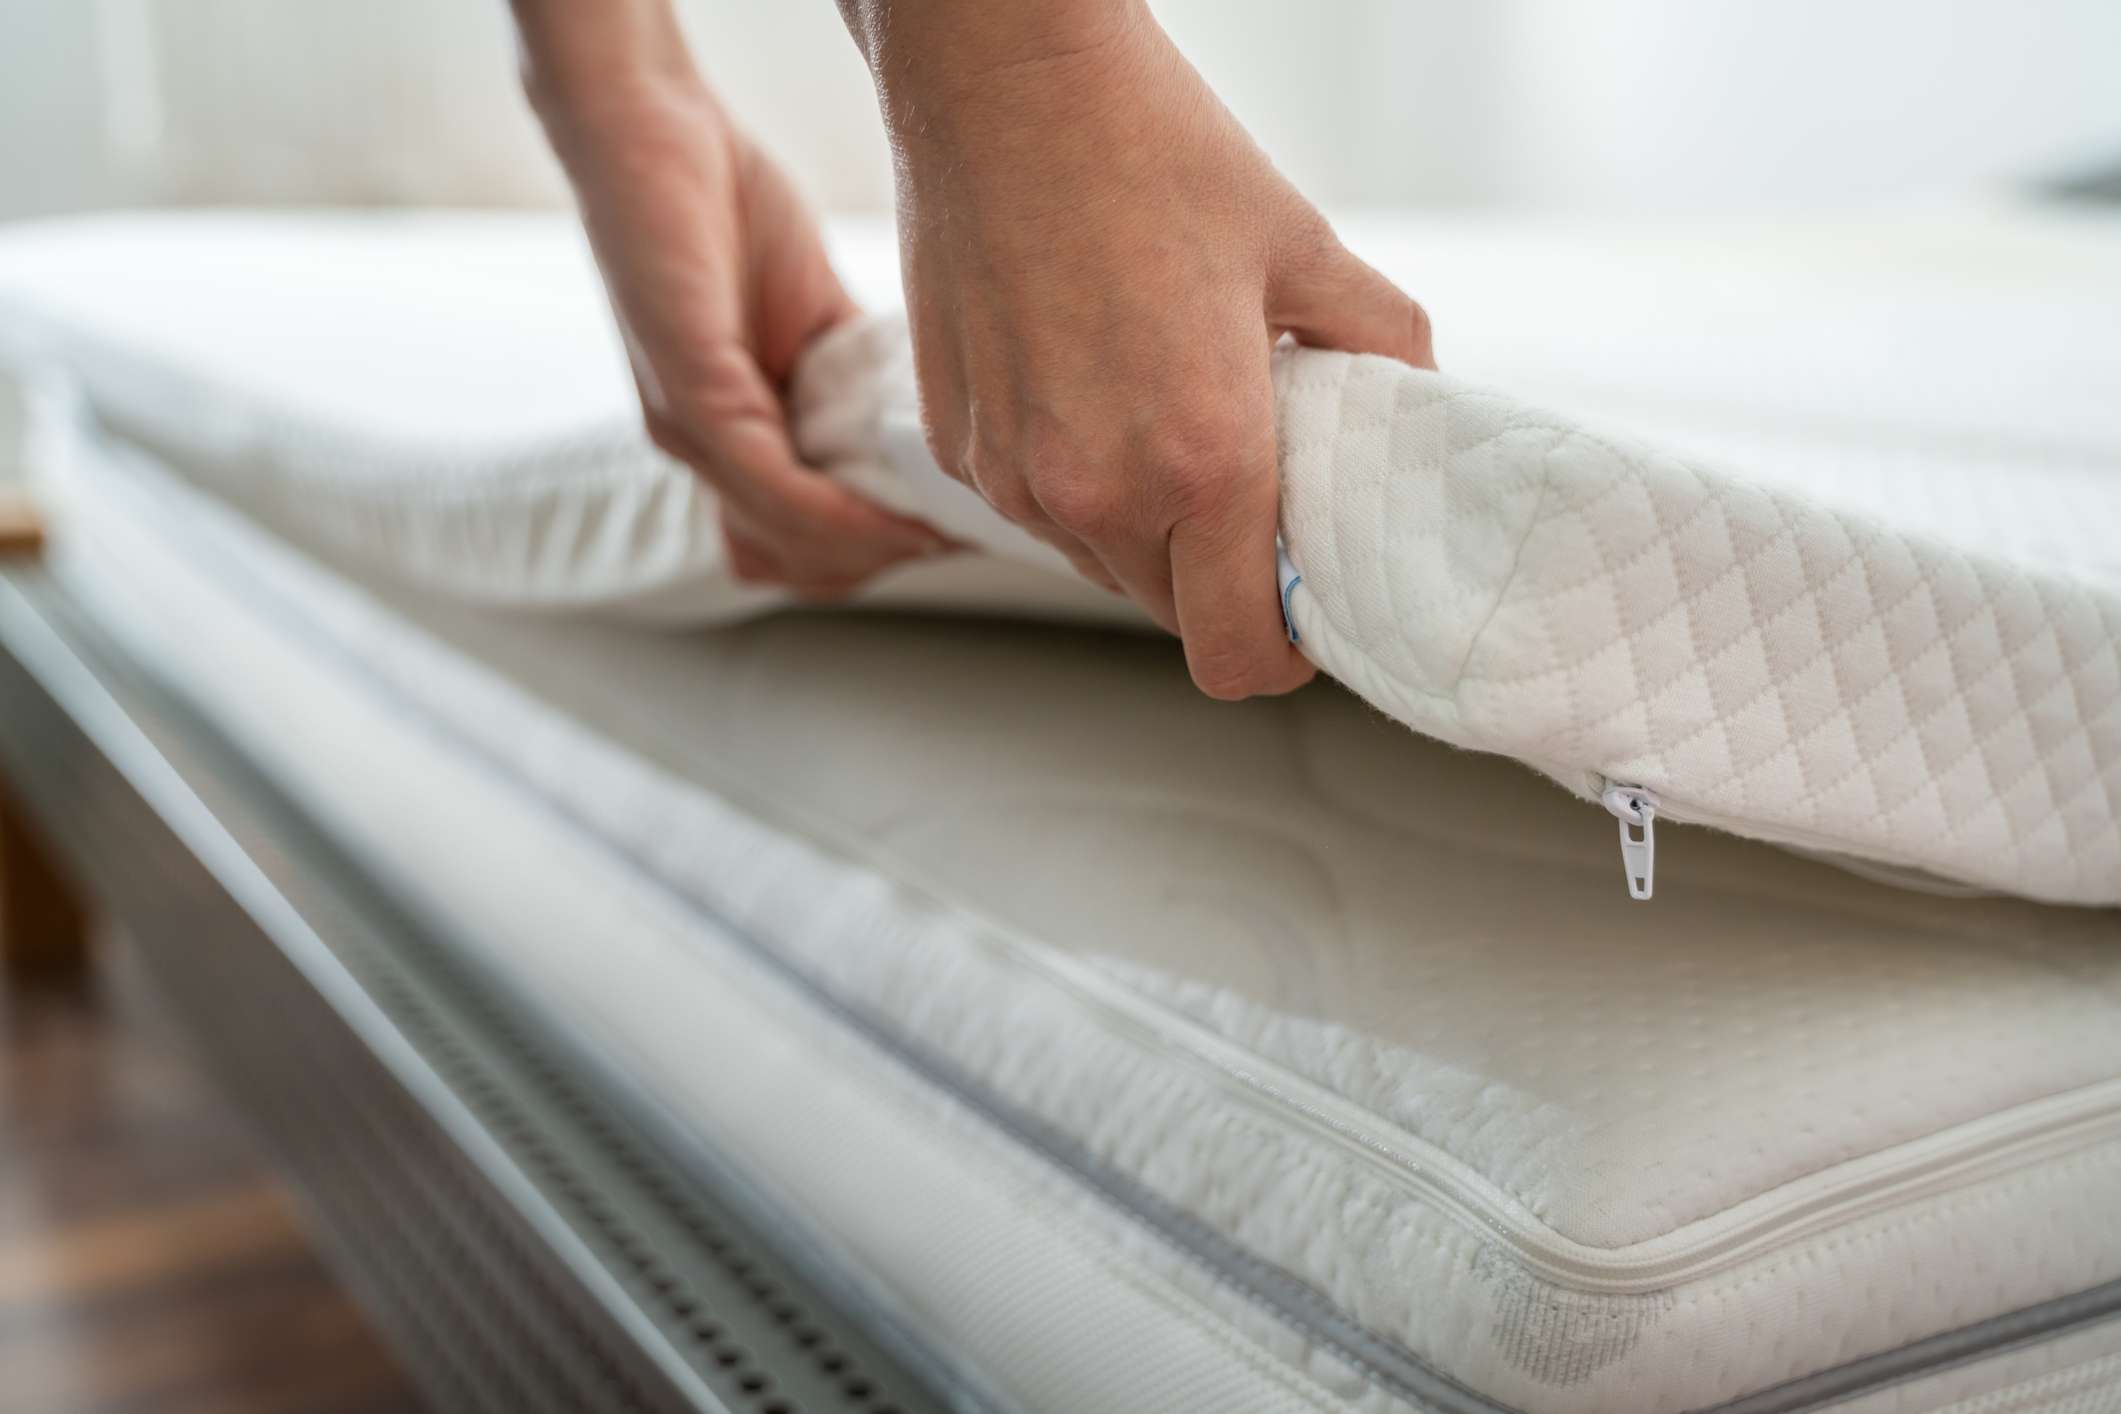 How To Discard An Old Mattress